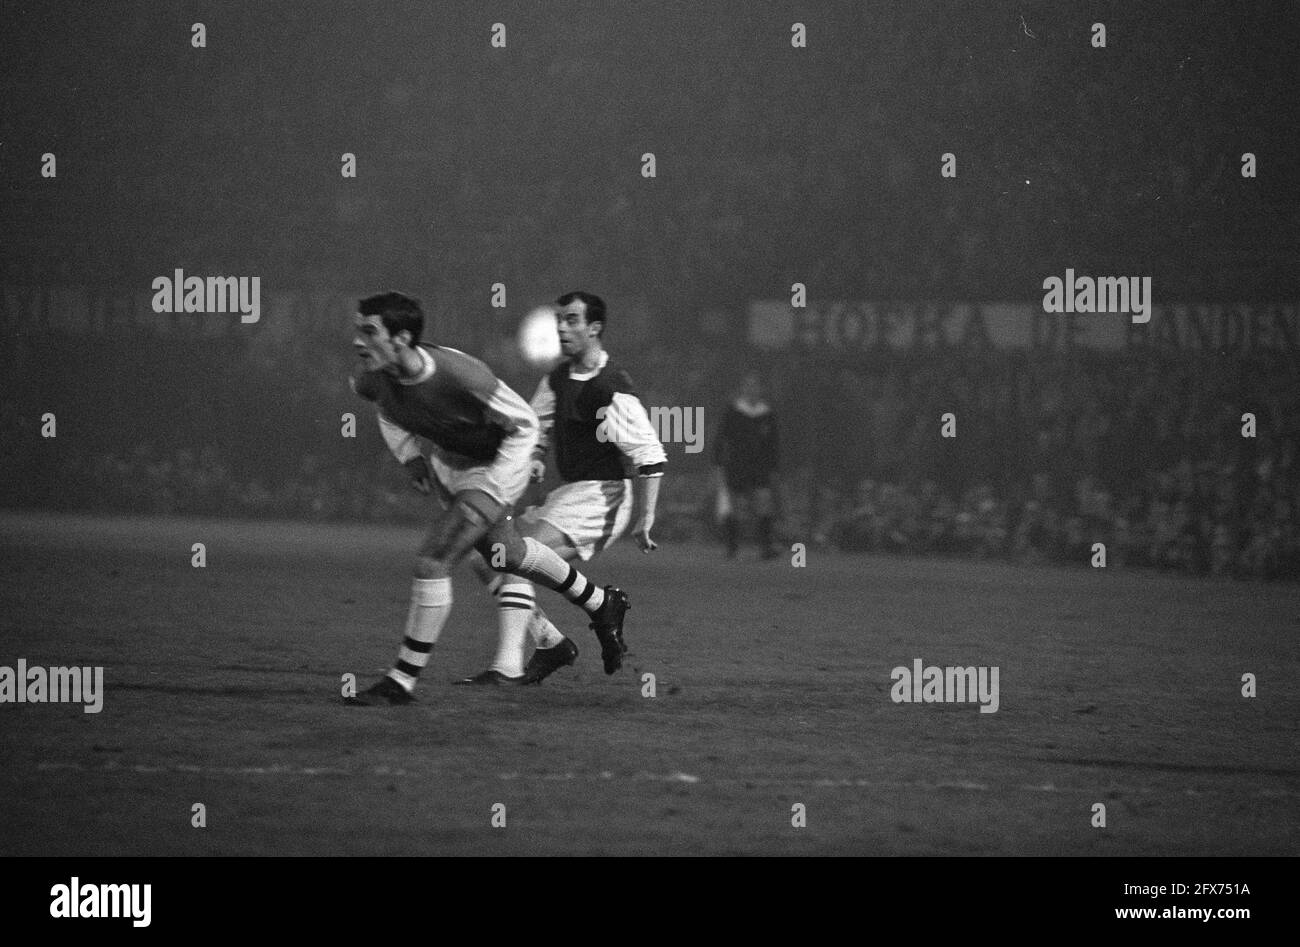 Coen Moulijn in action, November 14, 1967, sports, soccer, The Netherlands, 20th century press agency photo, news to remember, documentary, historic photography 1945-1990, visual stories, human history of the Twentieth Century, capturing moments in time Stock Photo